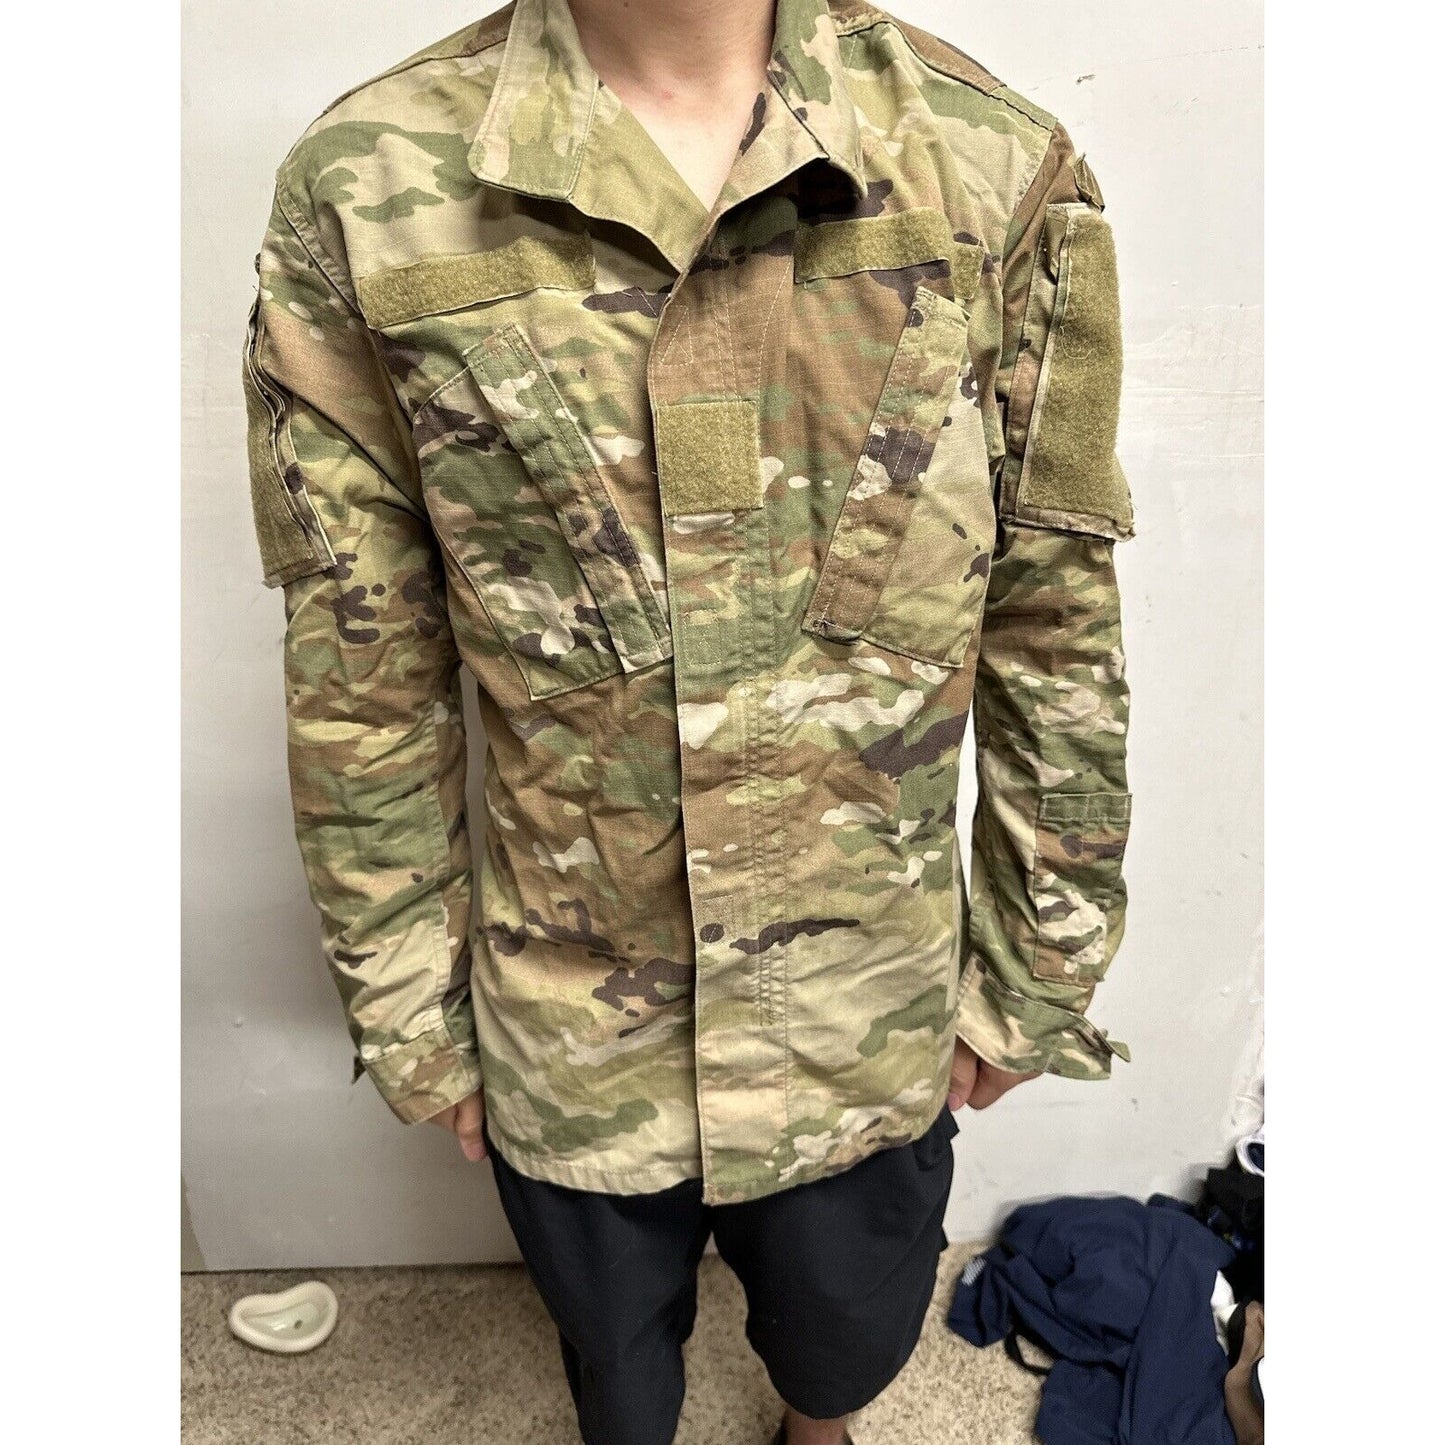 Men’s Ocp Small Regular Army Combat Air Force Space Force